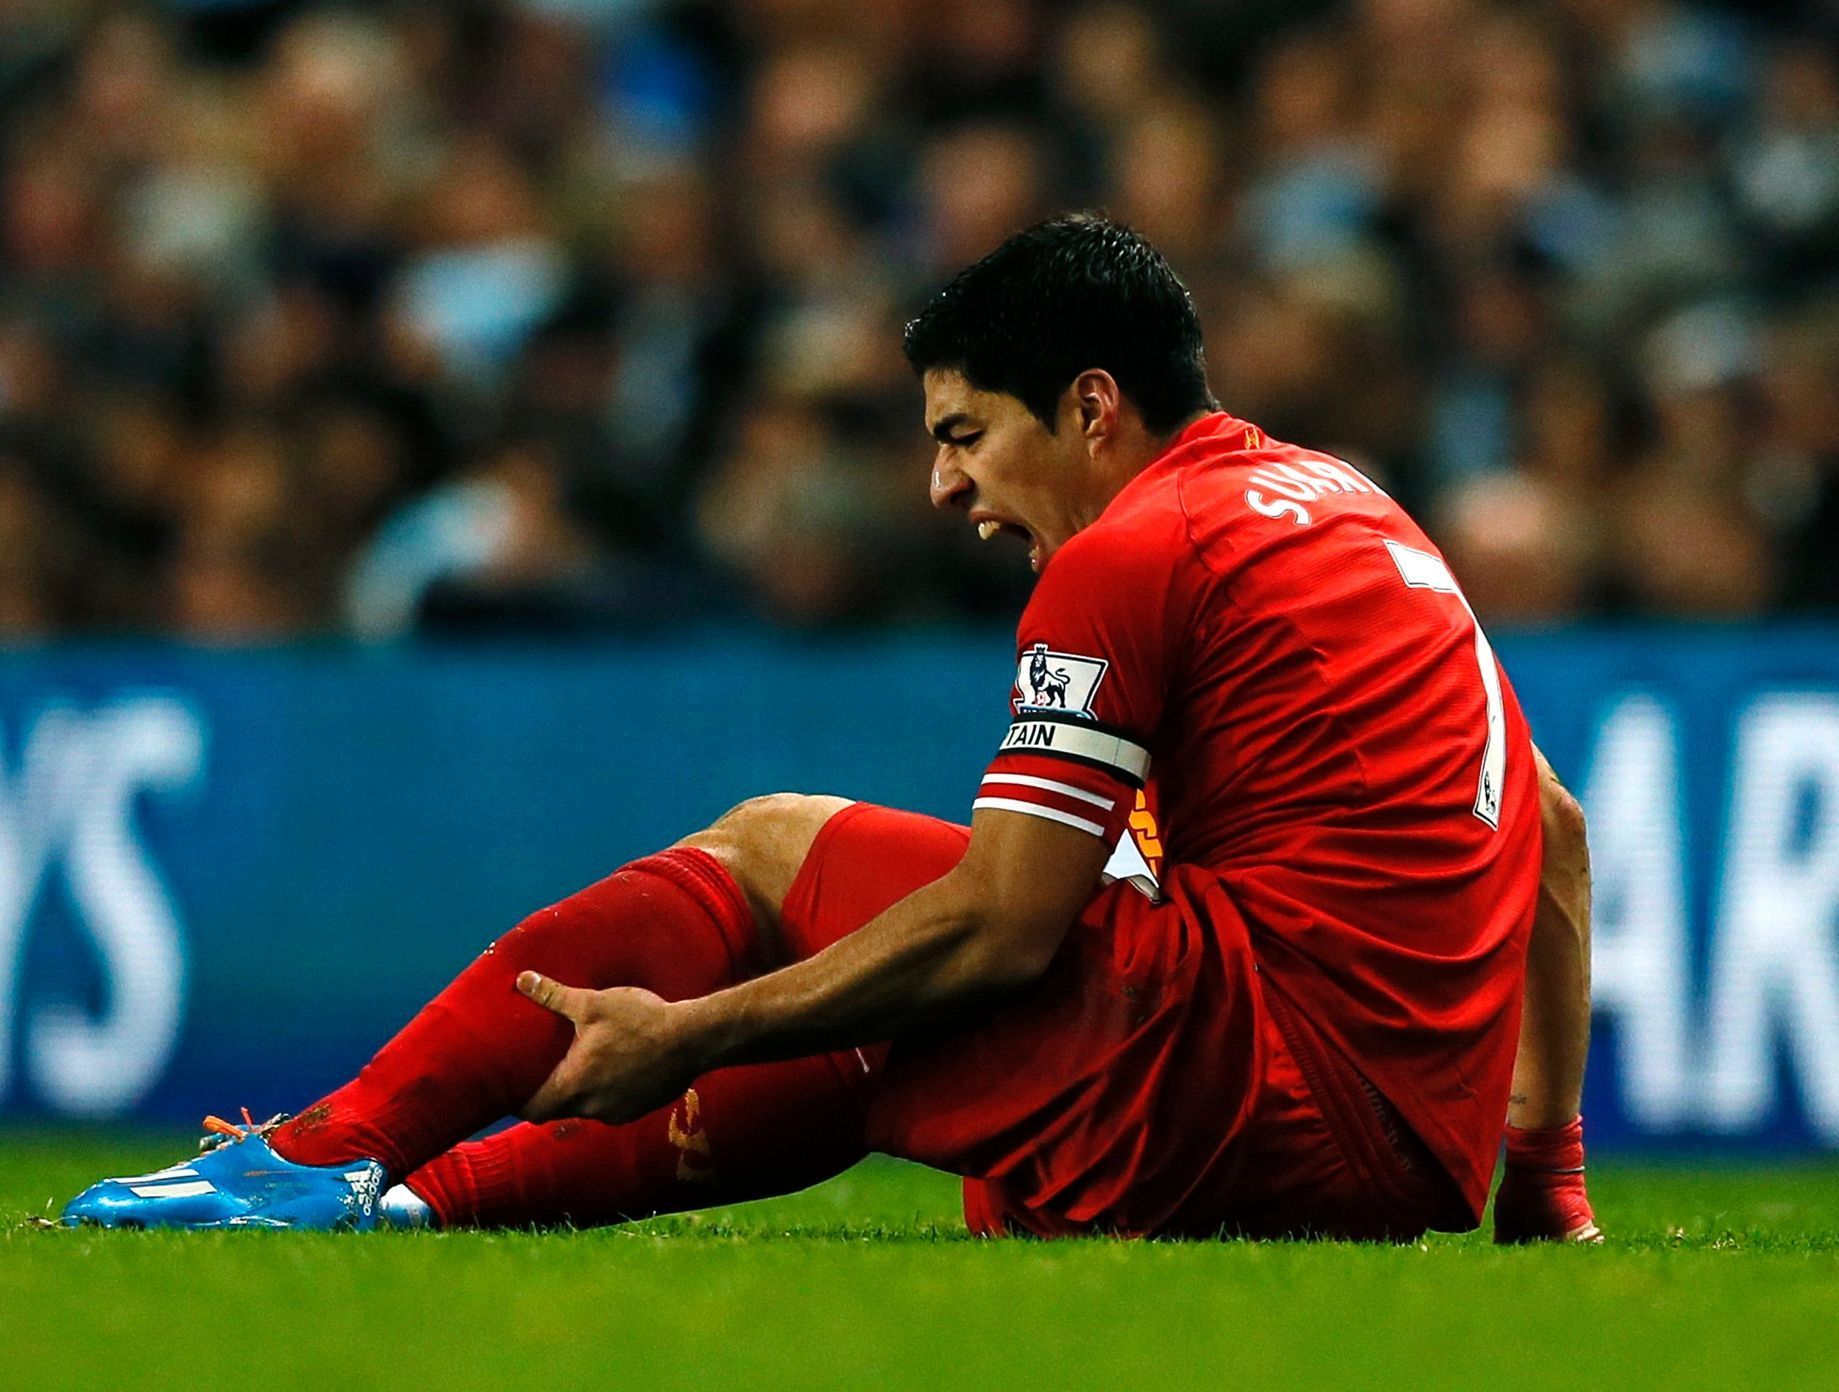 Liverpool's Suarez holds his leg during their English Premier League soccer match against Manchester City in Manchester